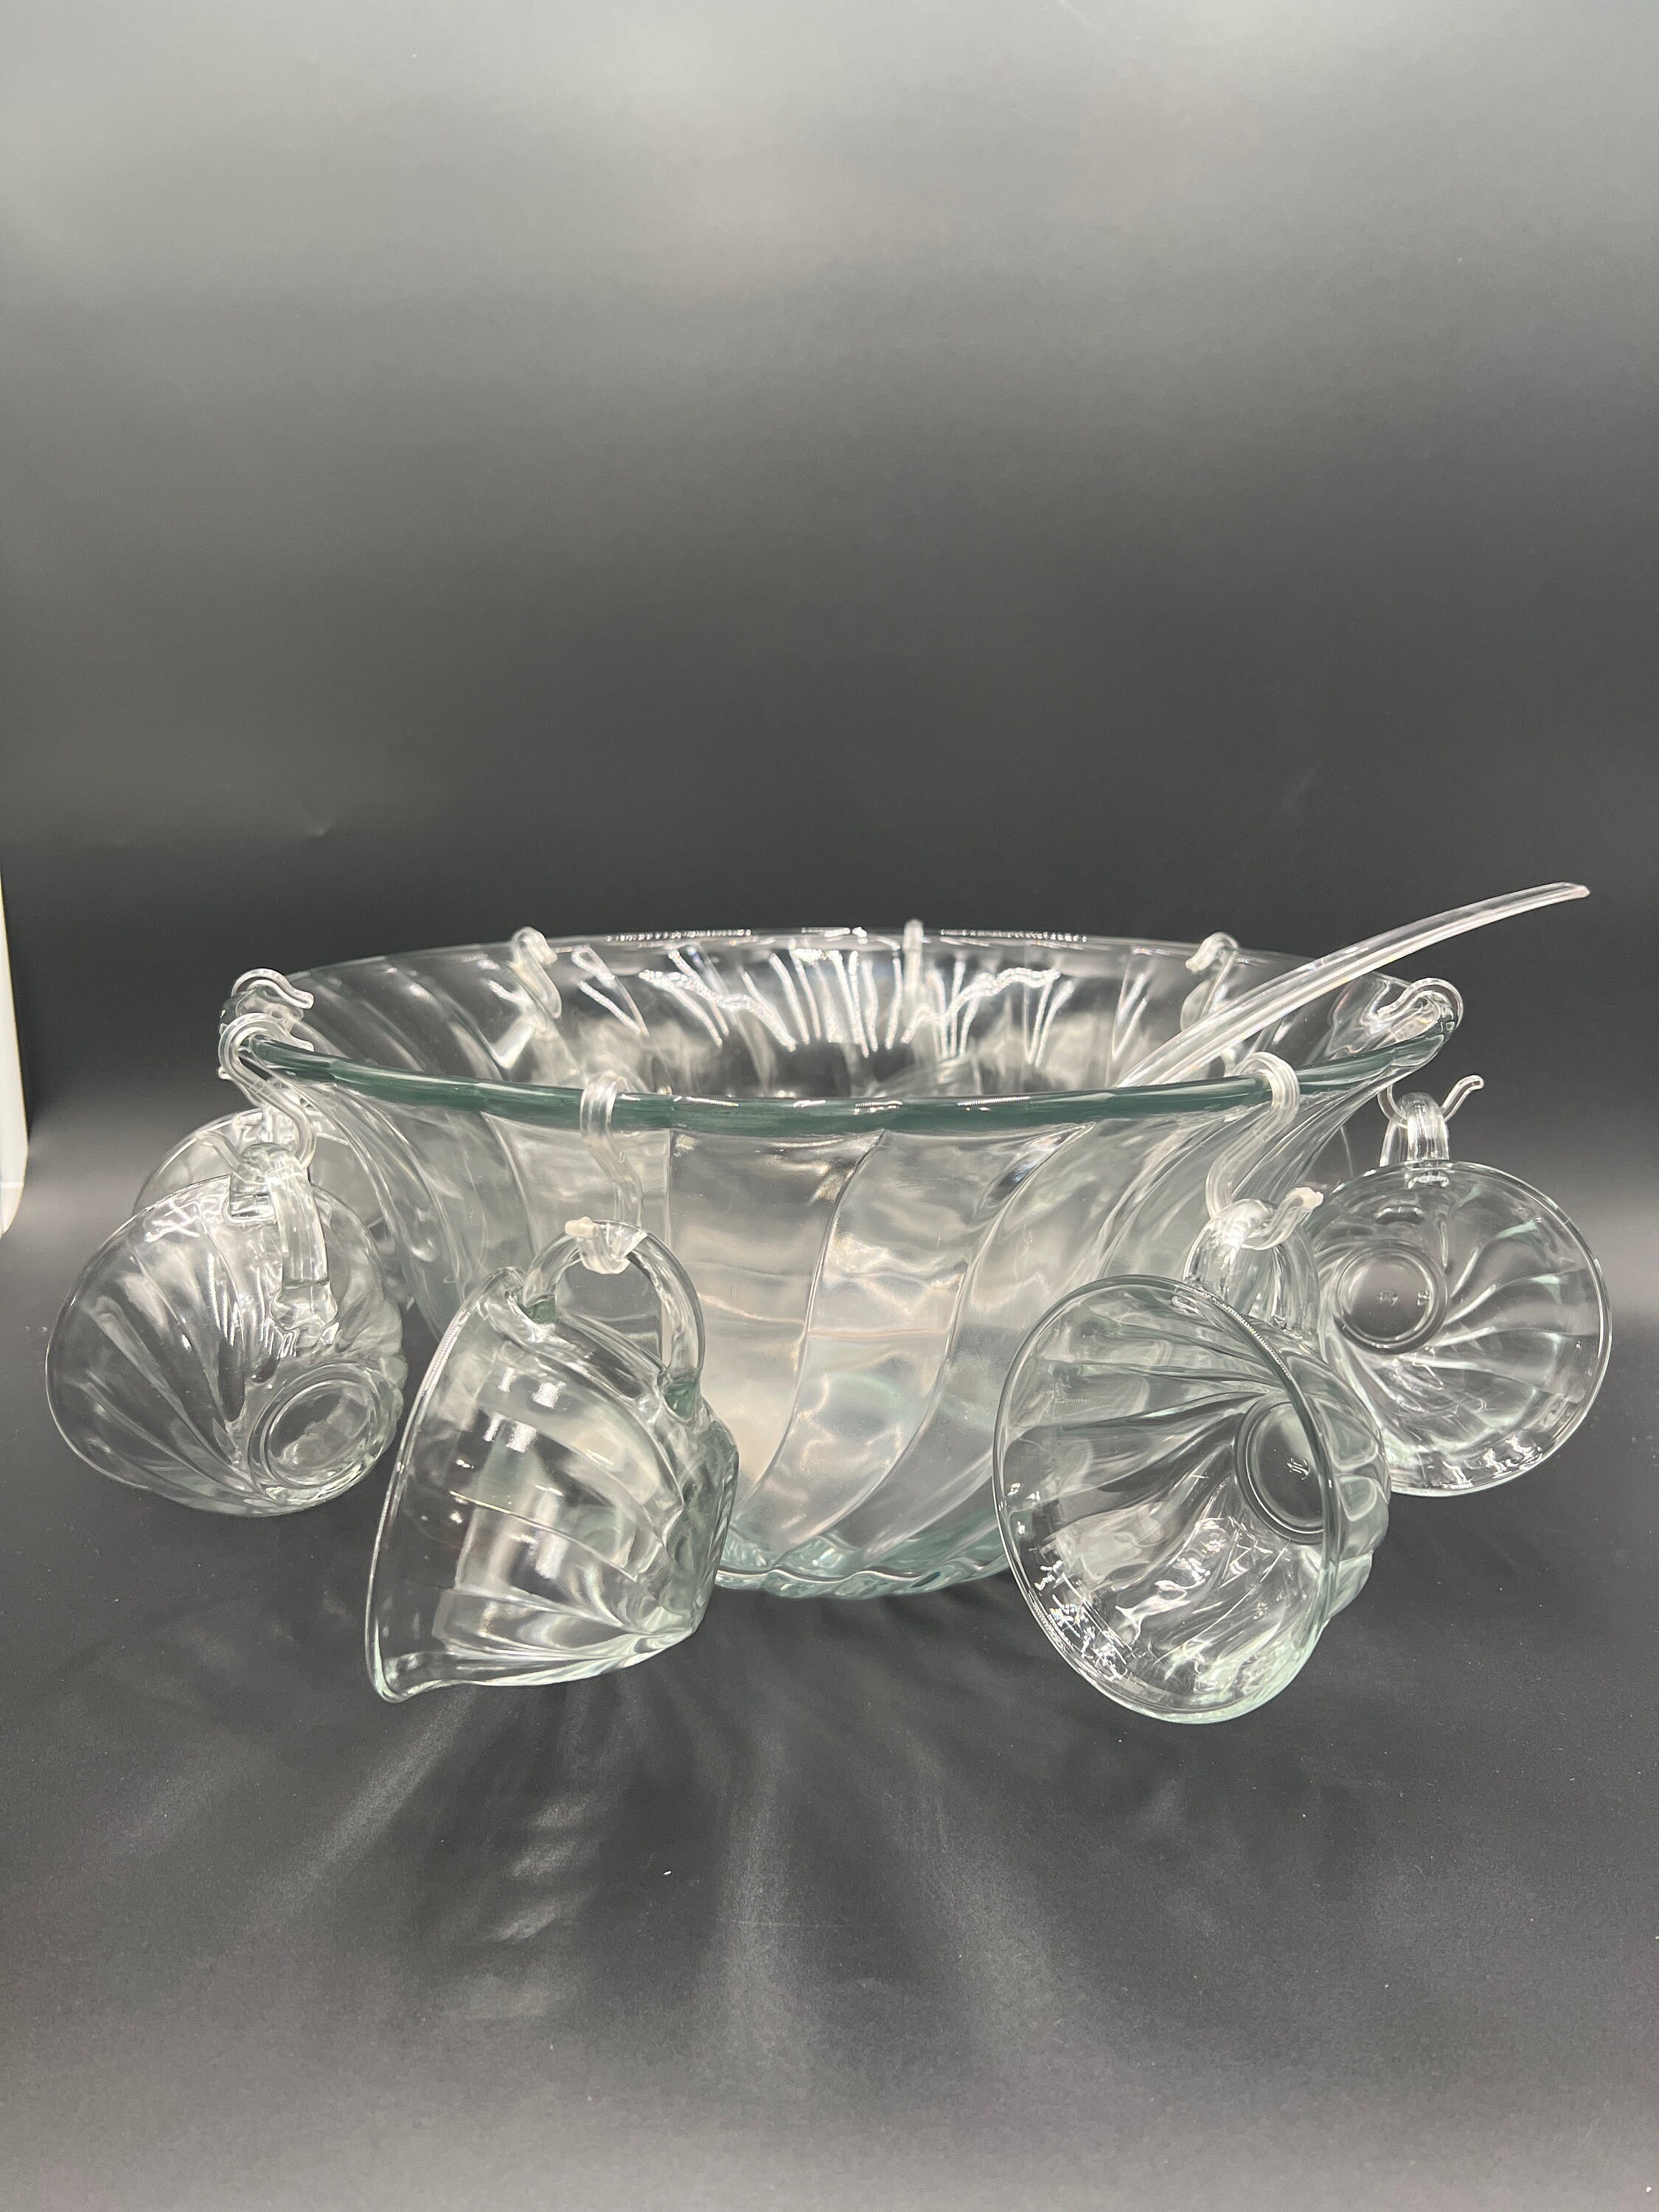 1960s Vintage Smoke Glass Cup Set by Anchor Hocking - 12 Pieces